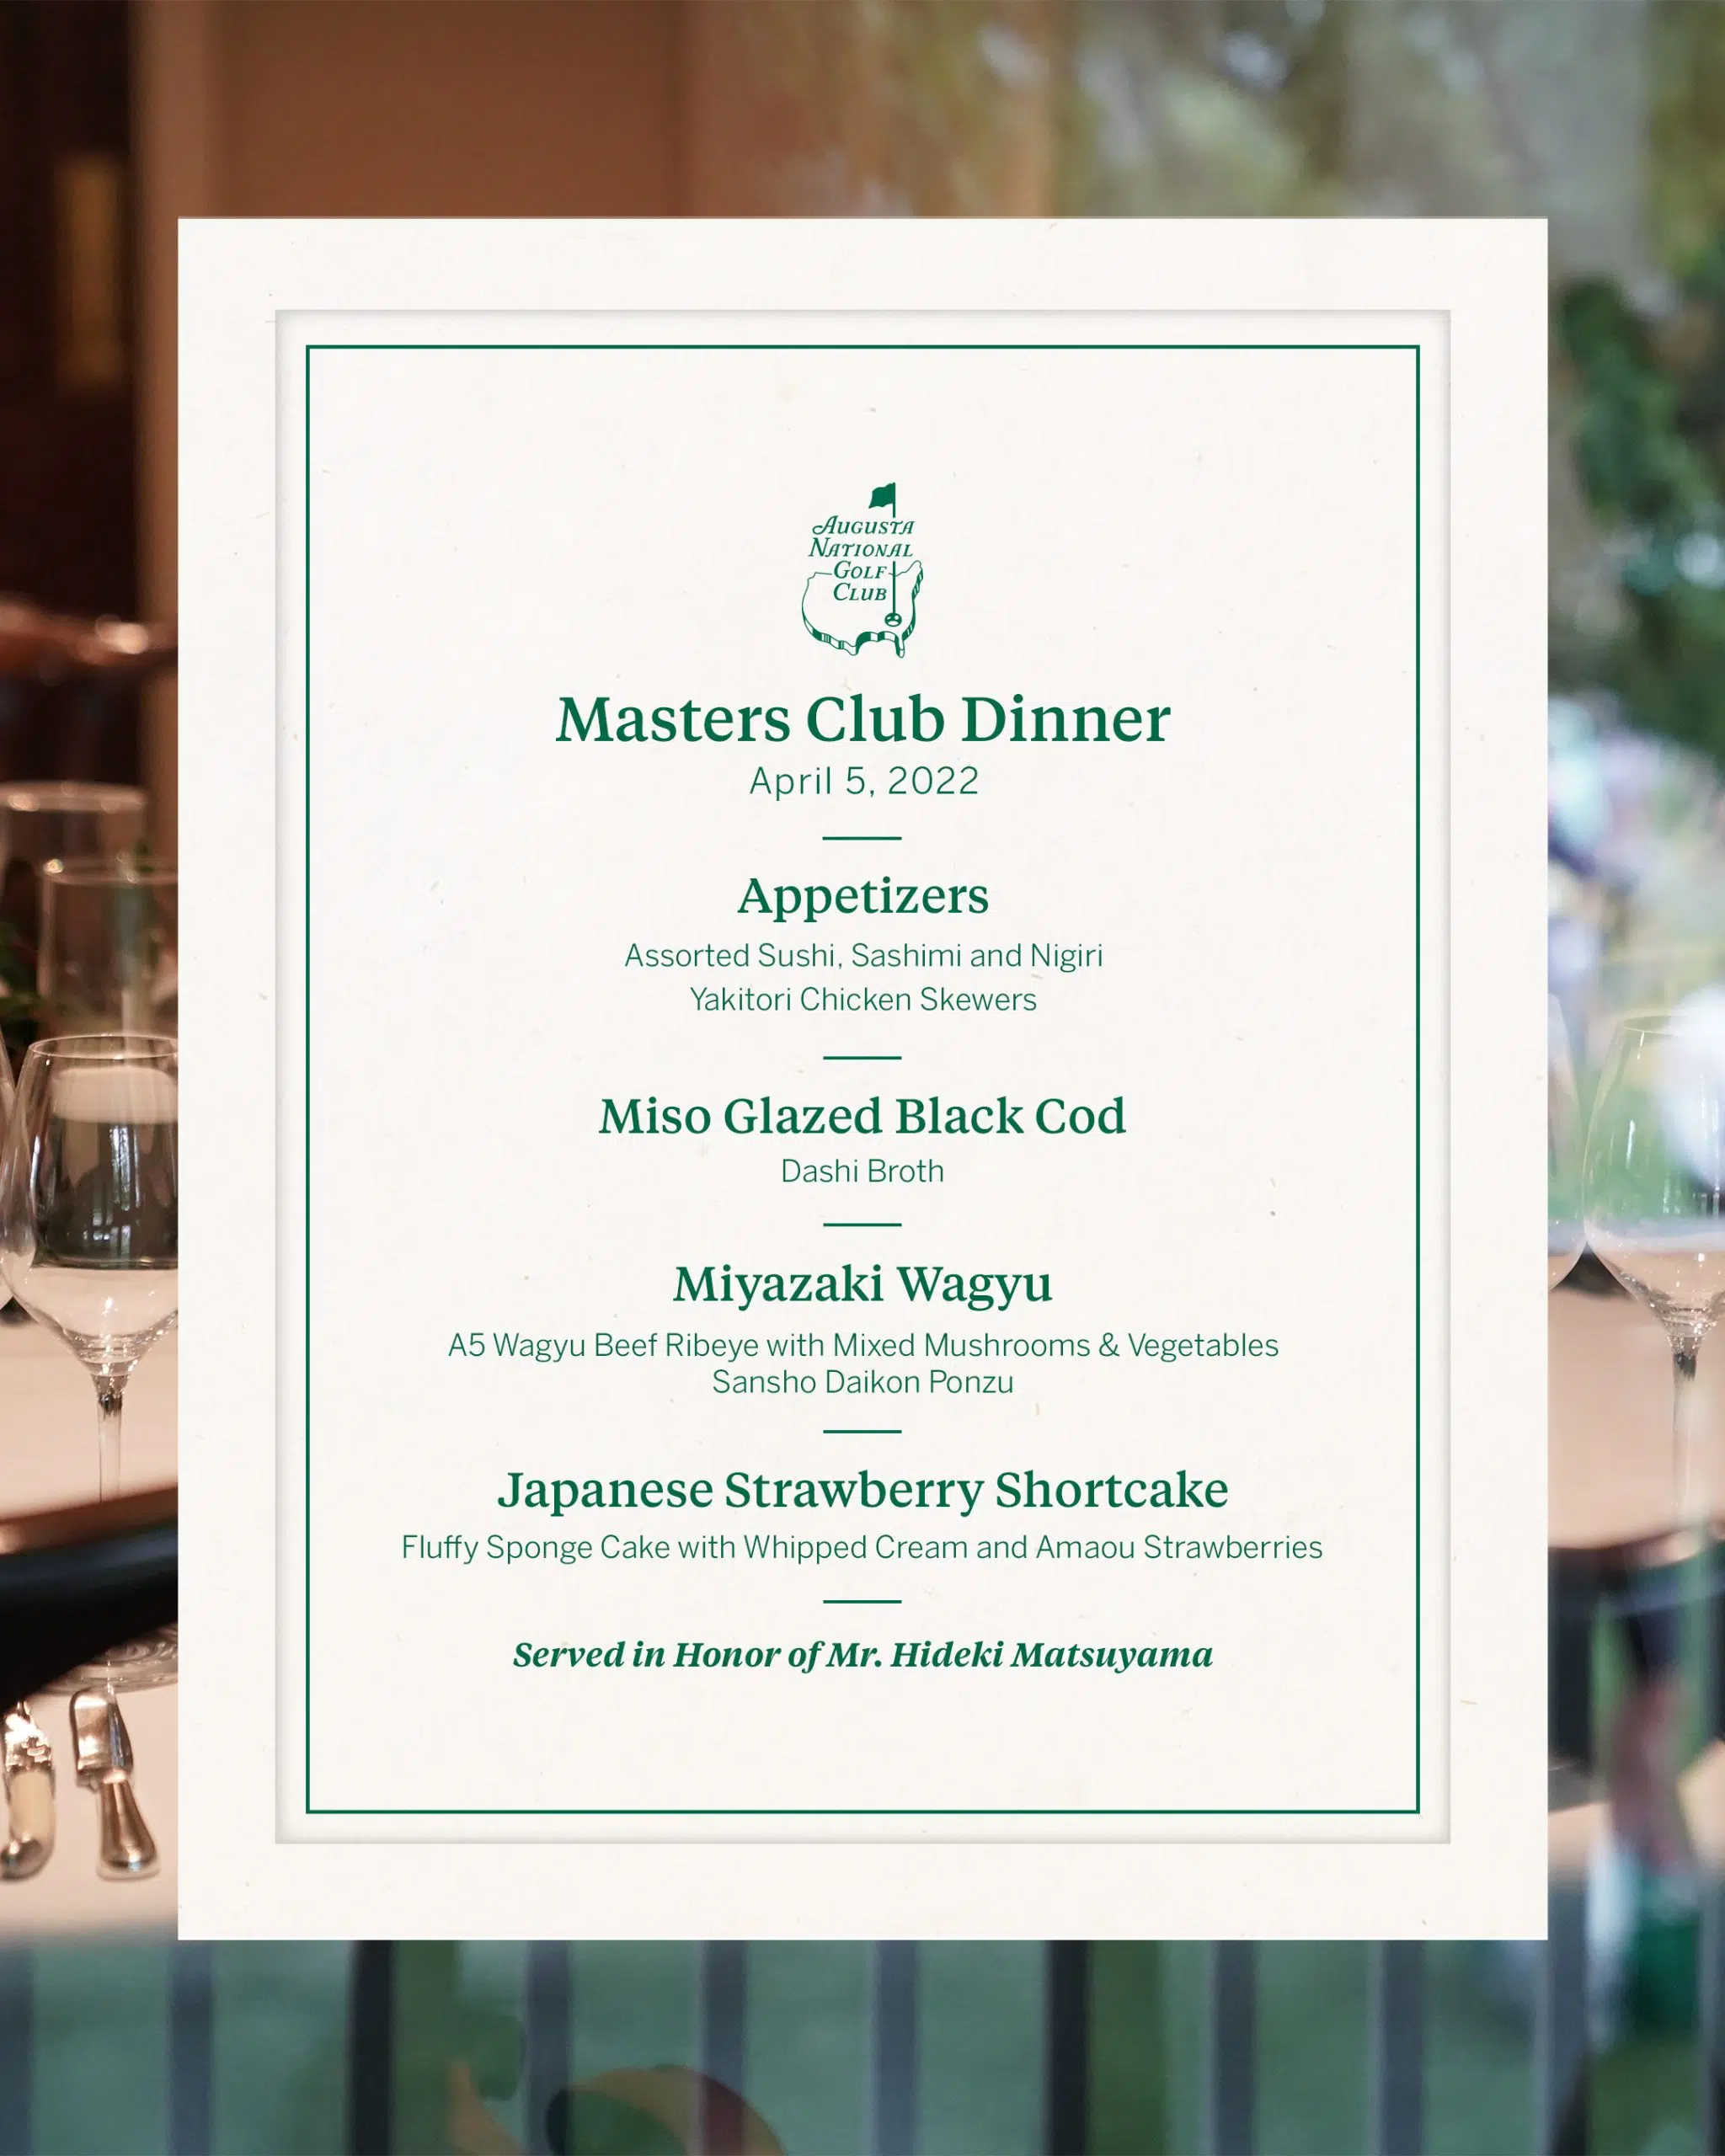 The 2022 Masters Dinner Menu is another Masterpiece. Sheboygan's